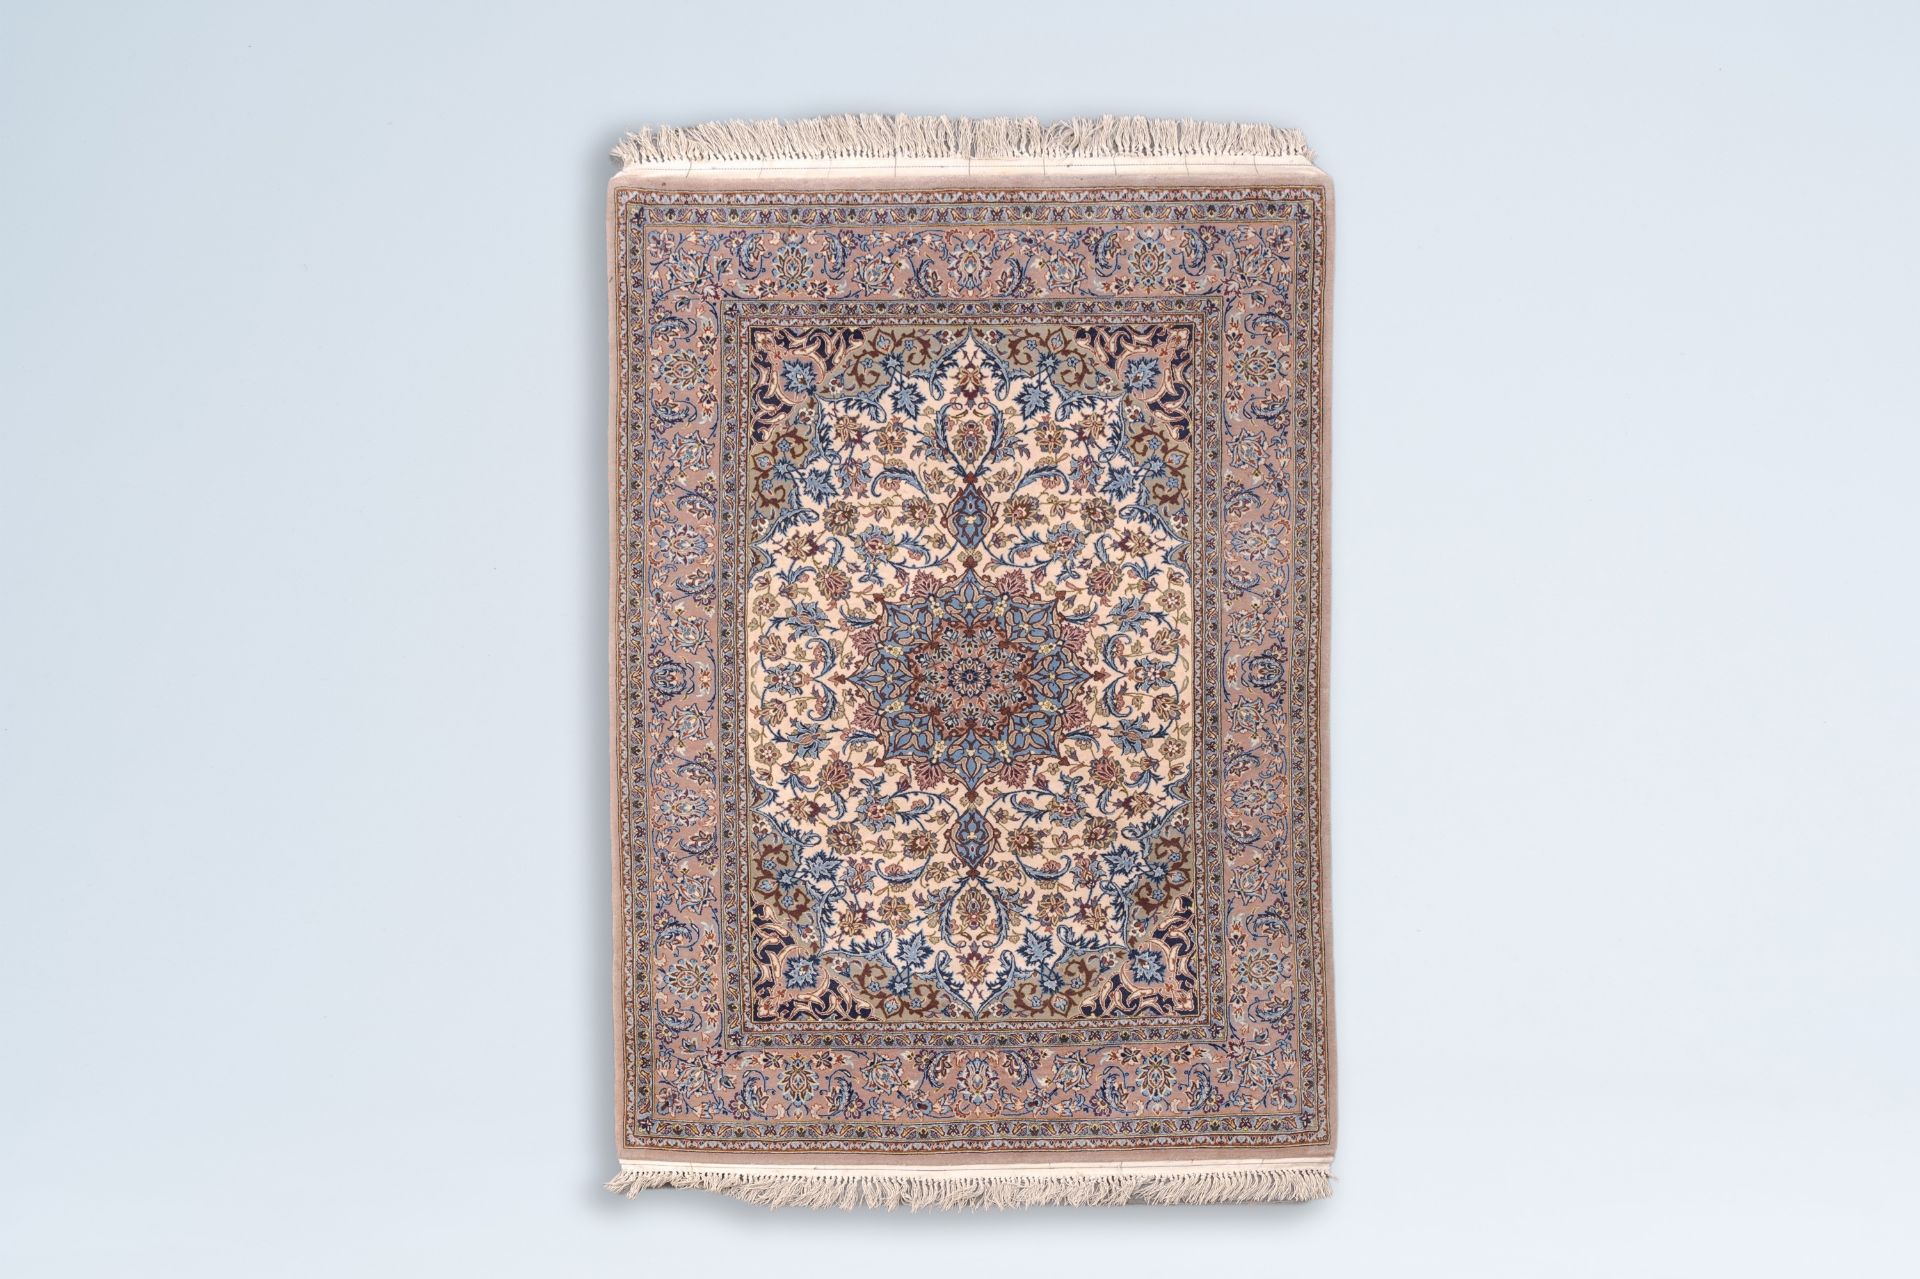 A Persian Isfahan rug with floral design, wool on cotton, Iran, 20th C.